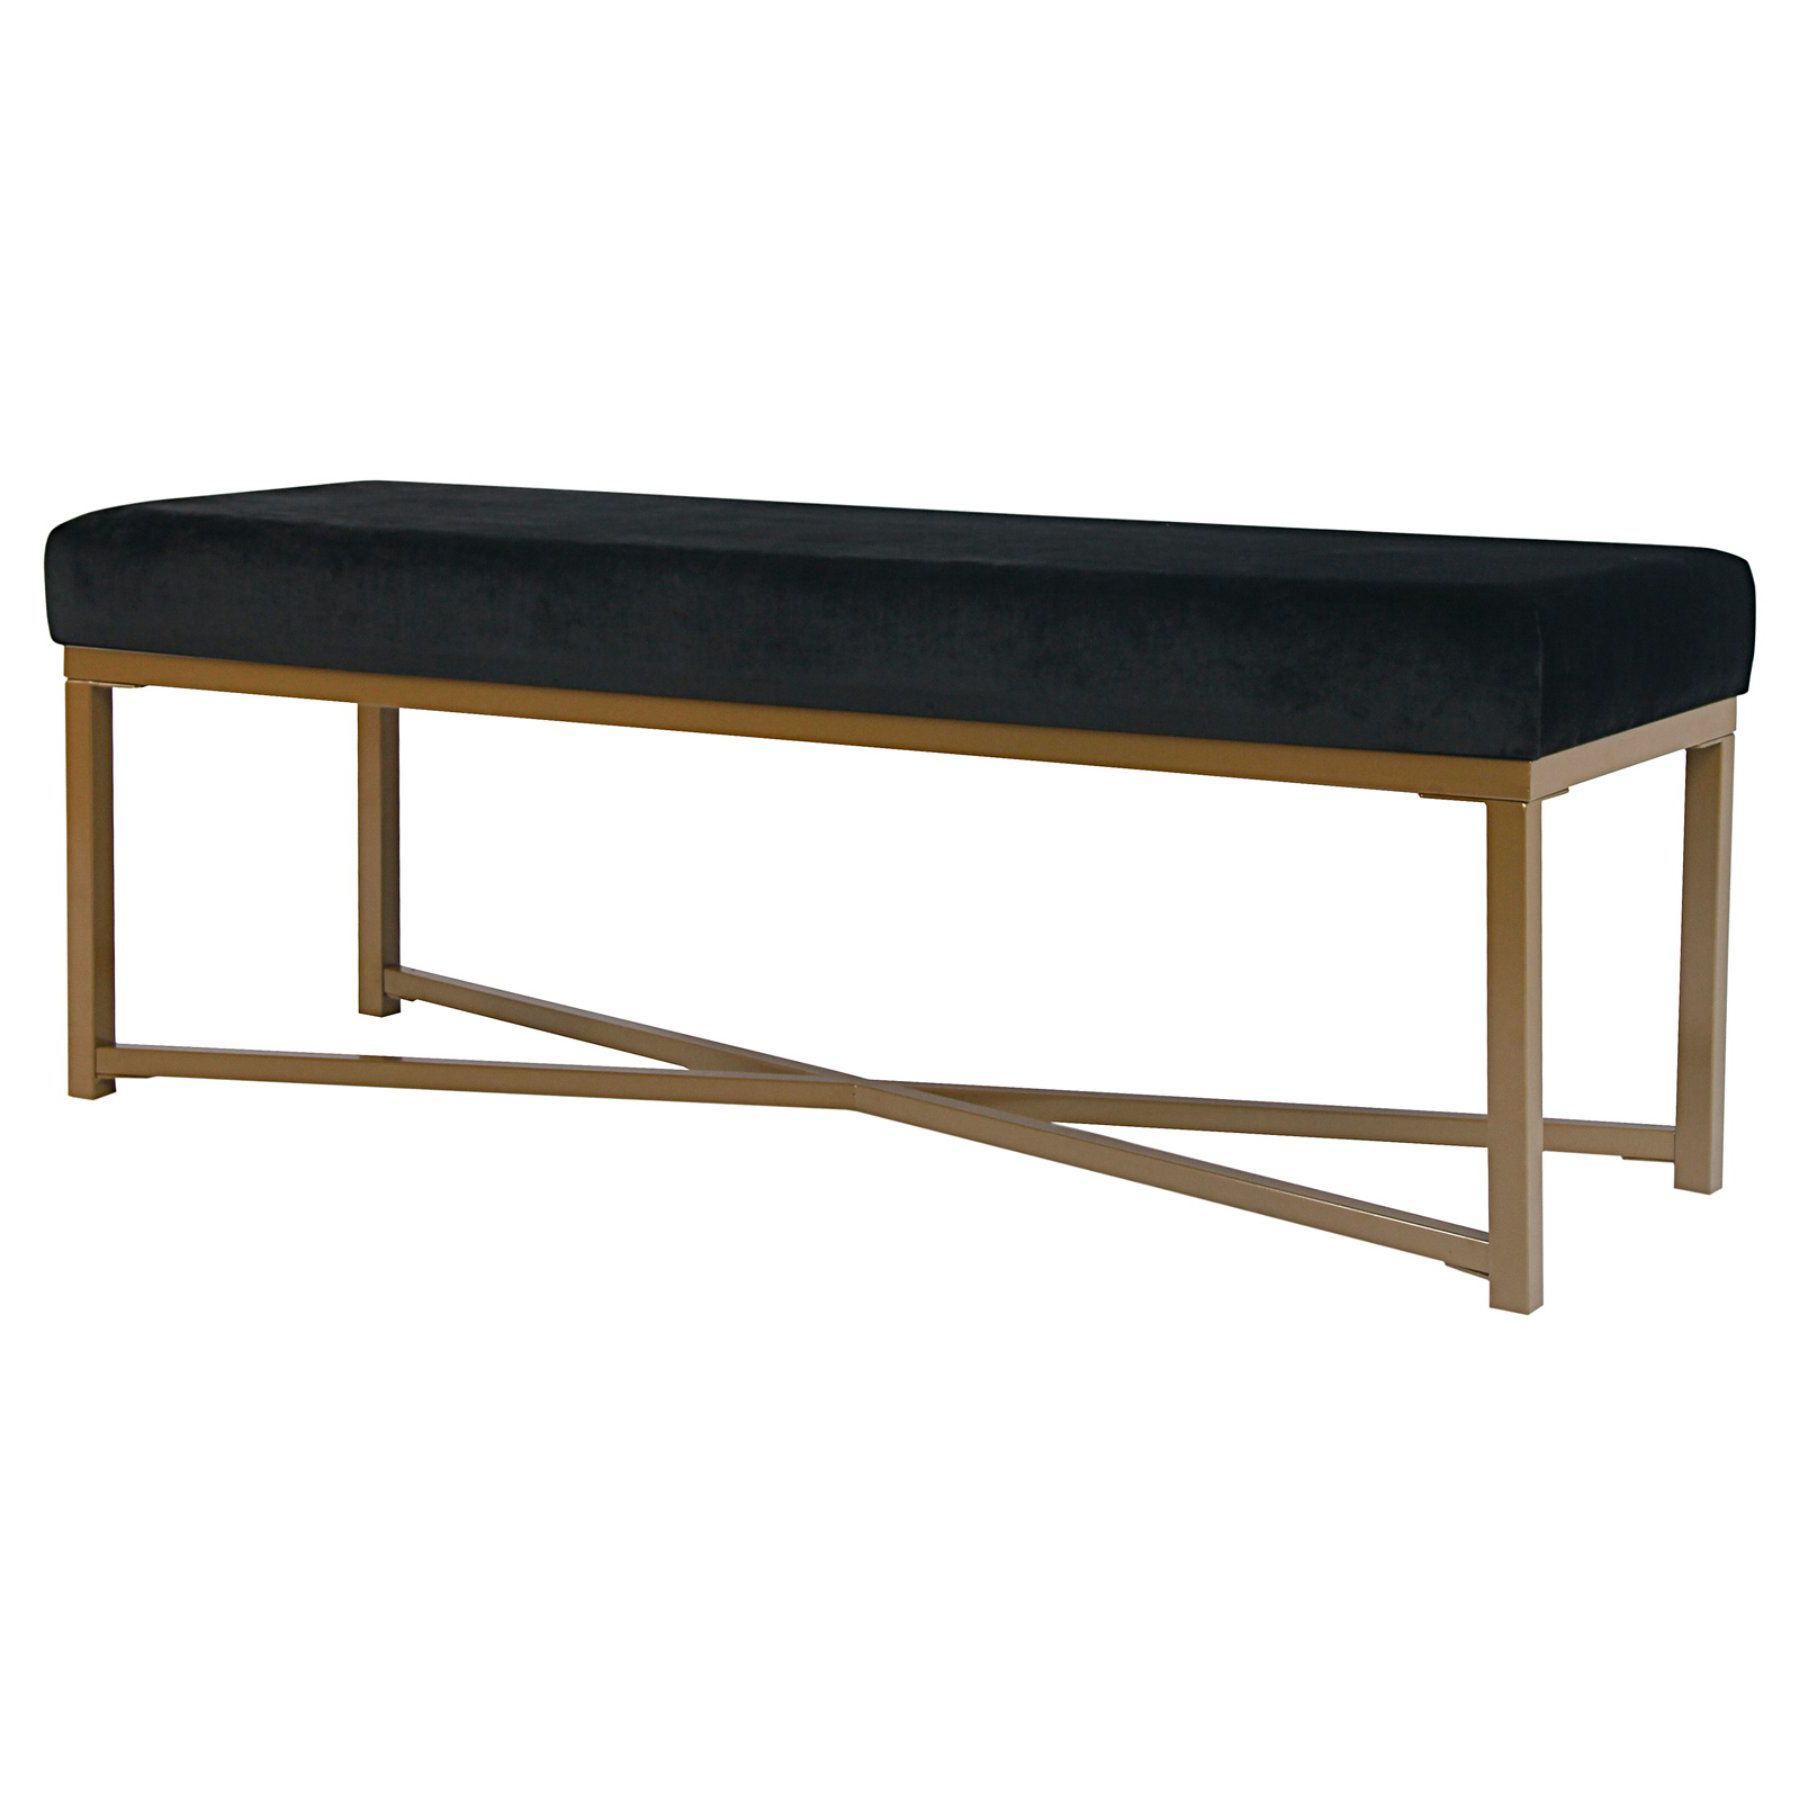 Homepop Velvet Rectangle Bench | Products | Pinterest Throughout Parsons Travertine Top &amp; Brass Base 48x16 Console Tables (View 3 of 20)